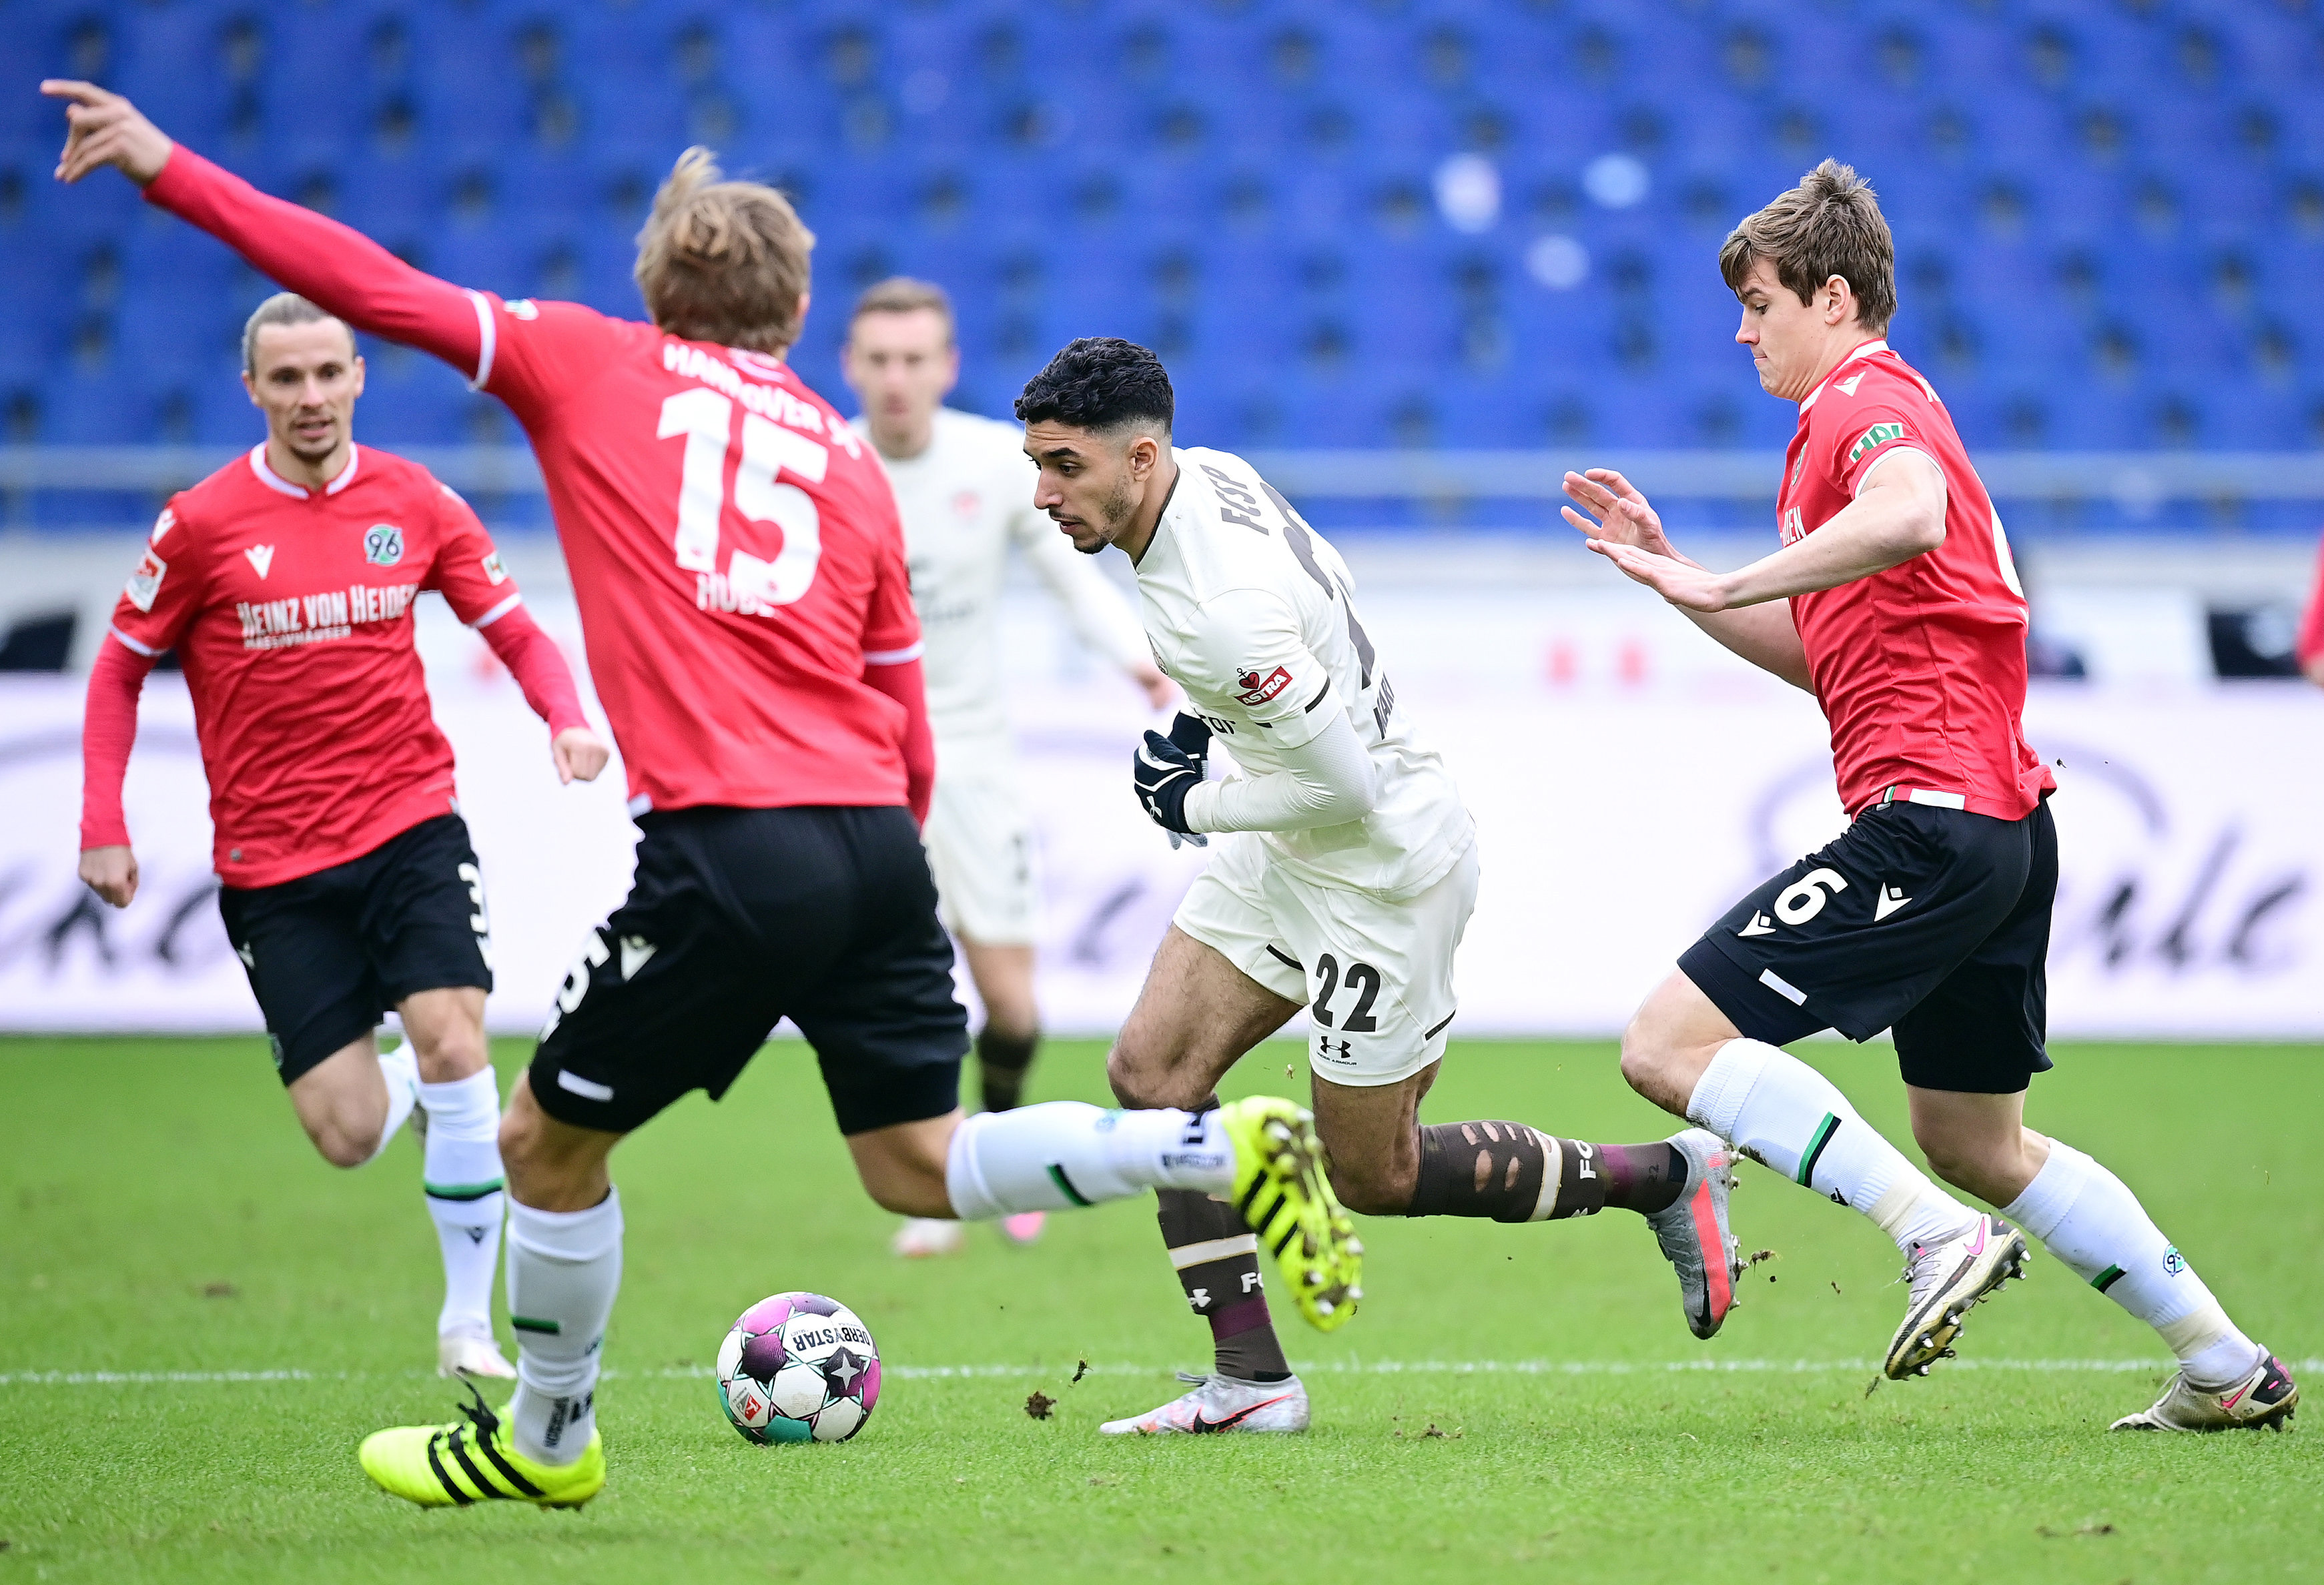 Omar Marmoush followed up an excellent performance at home against Kiel with another strong showing at Hannover.